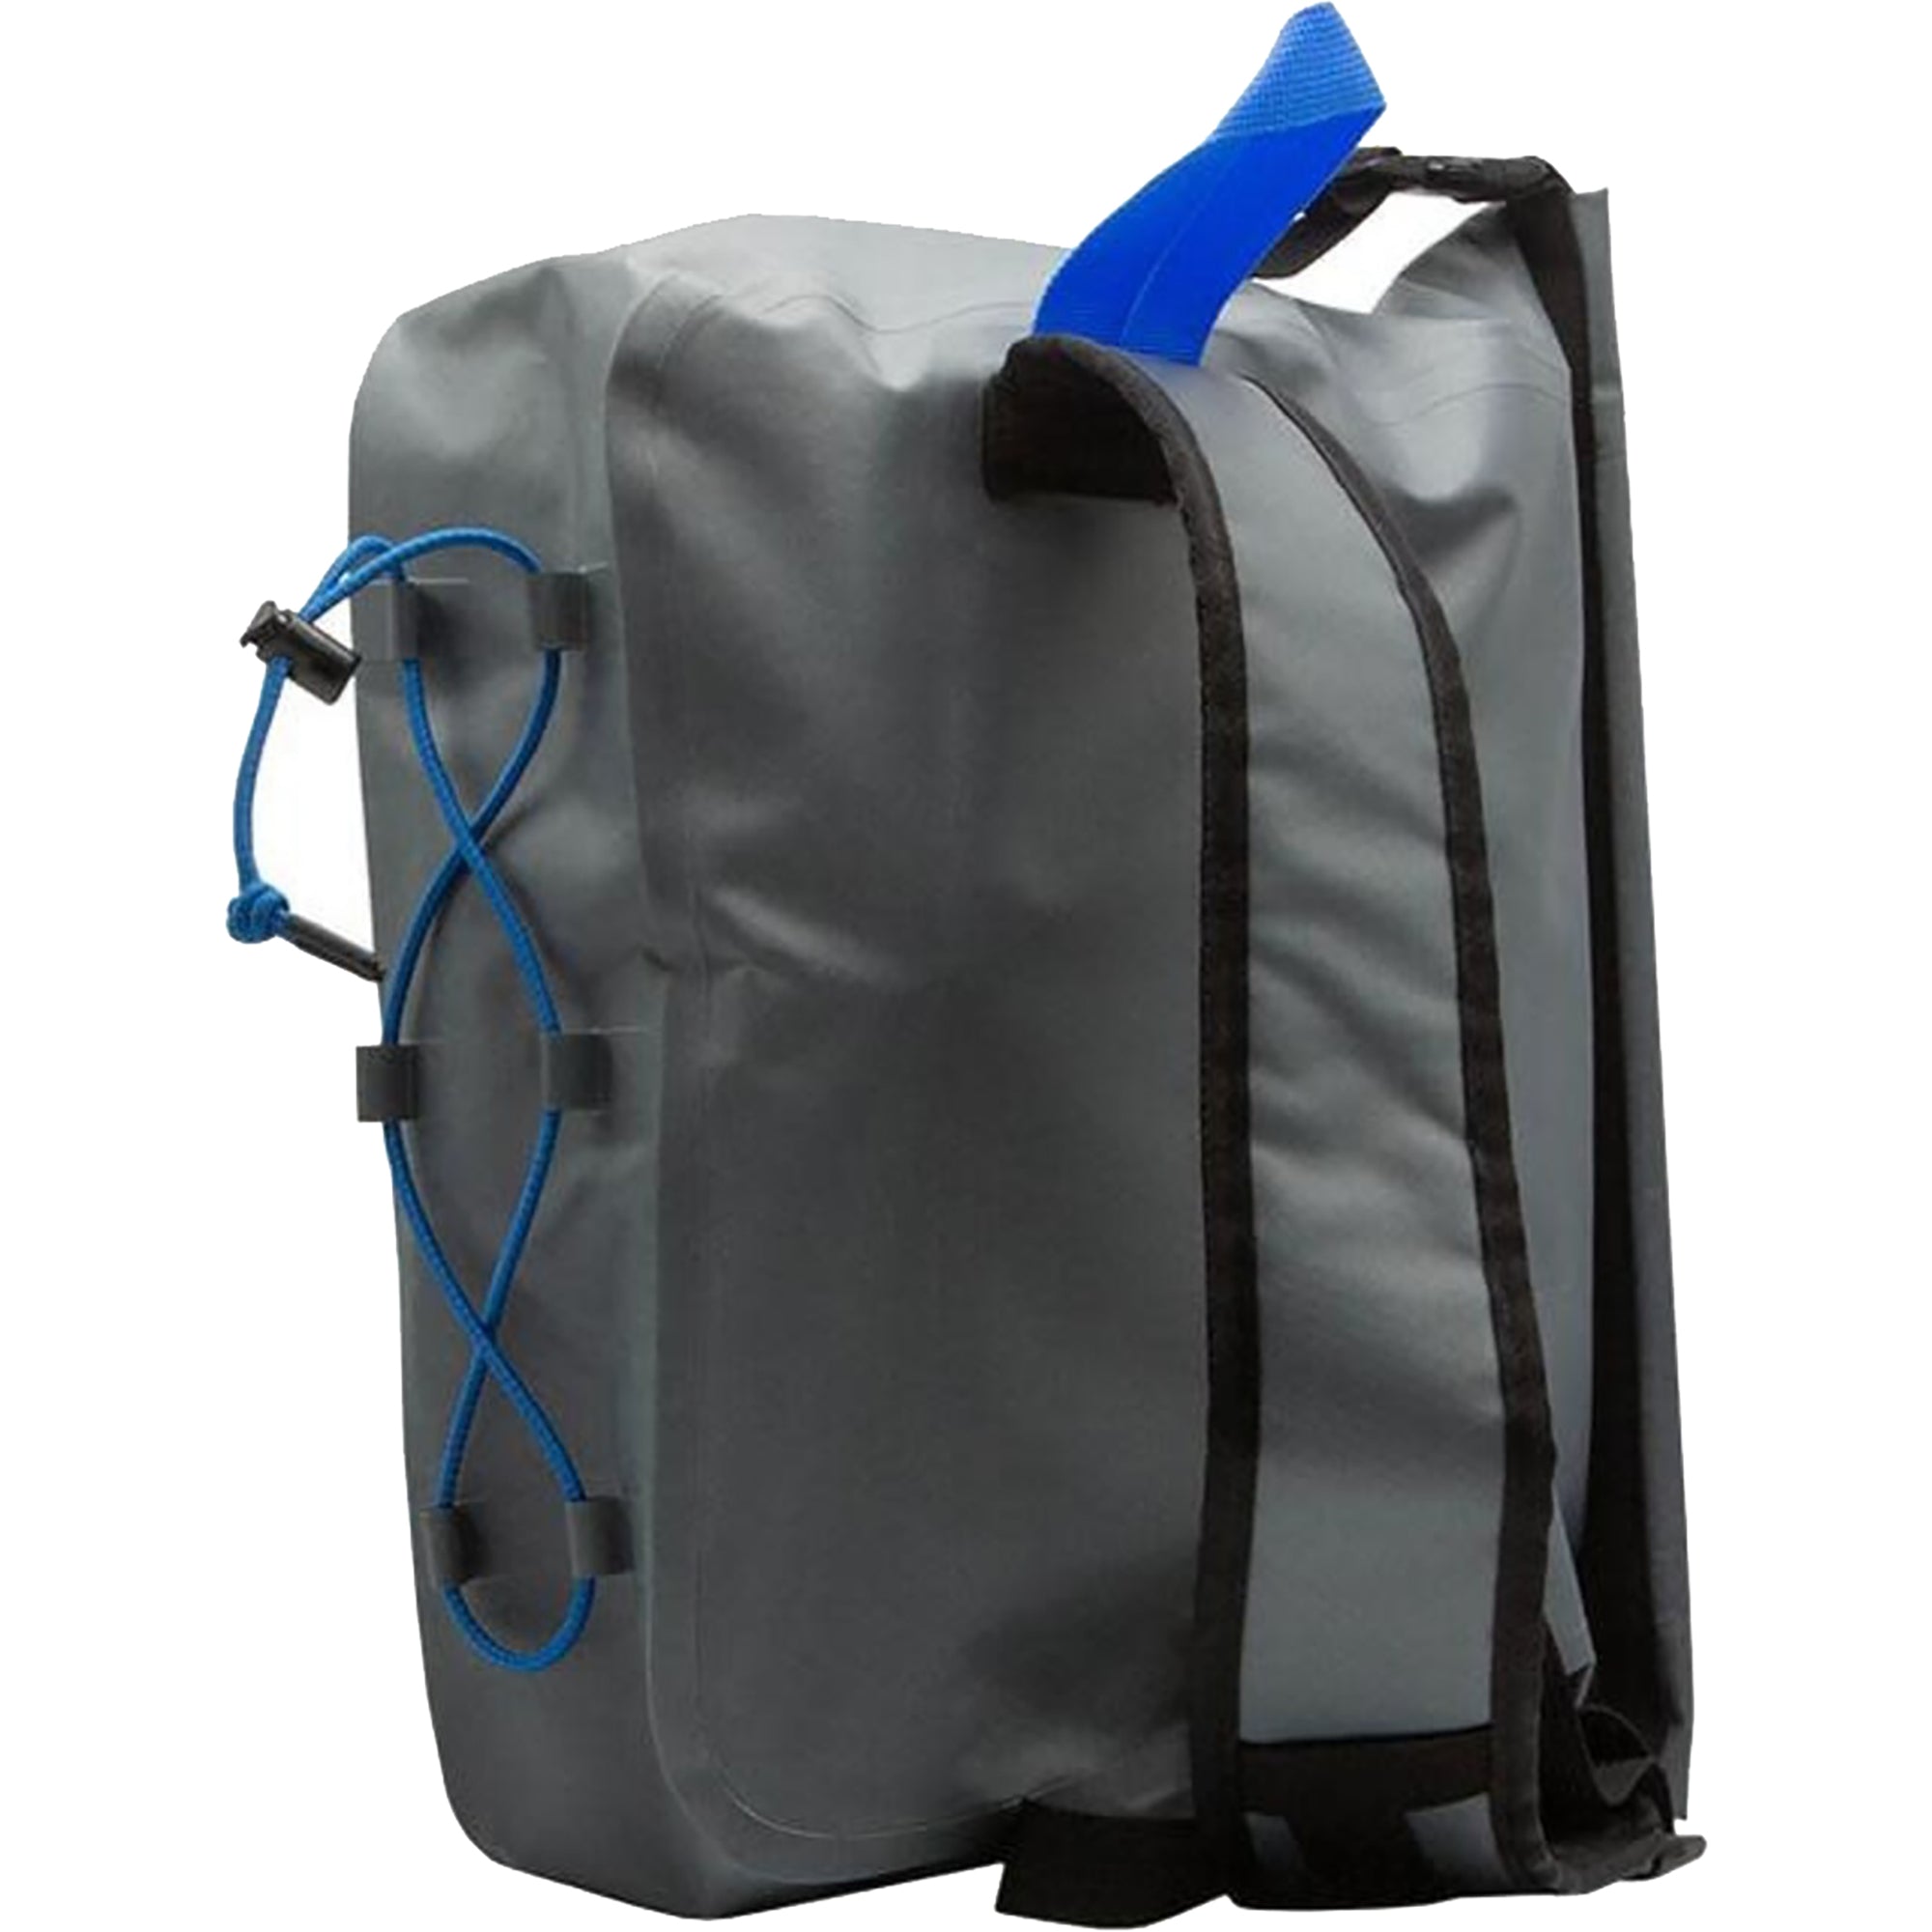 Chums Storm Series 20L Waterproof Gear Sling Backpack - Gray Chums